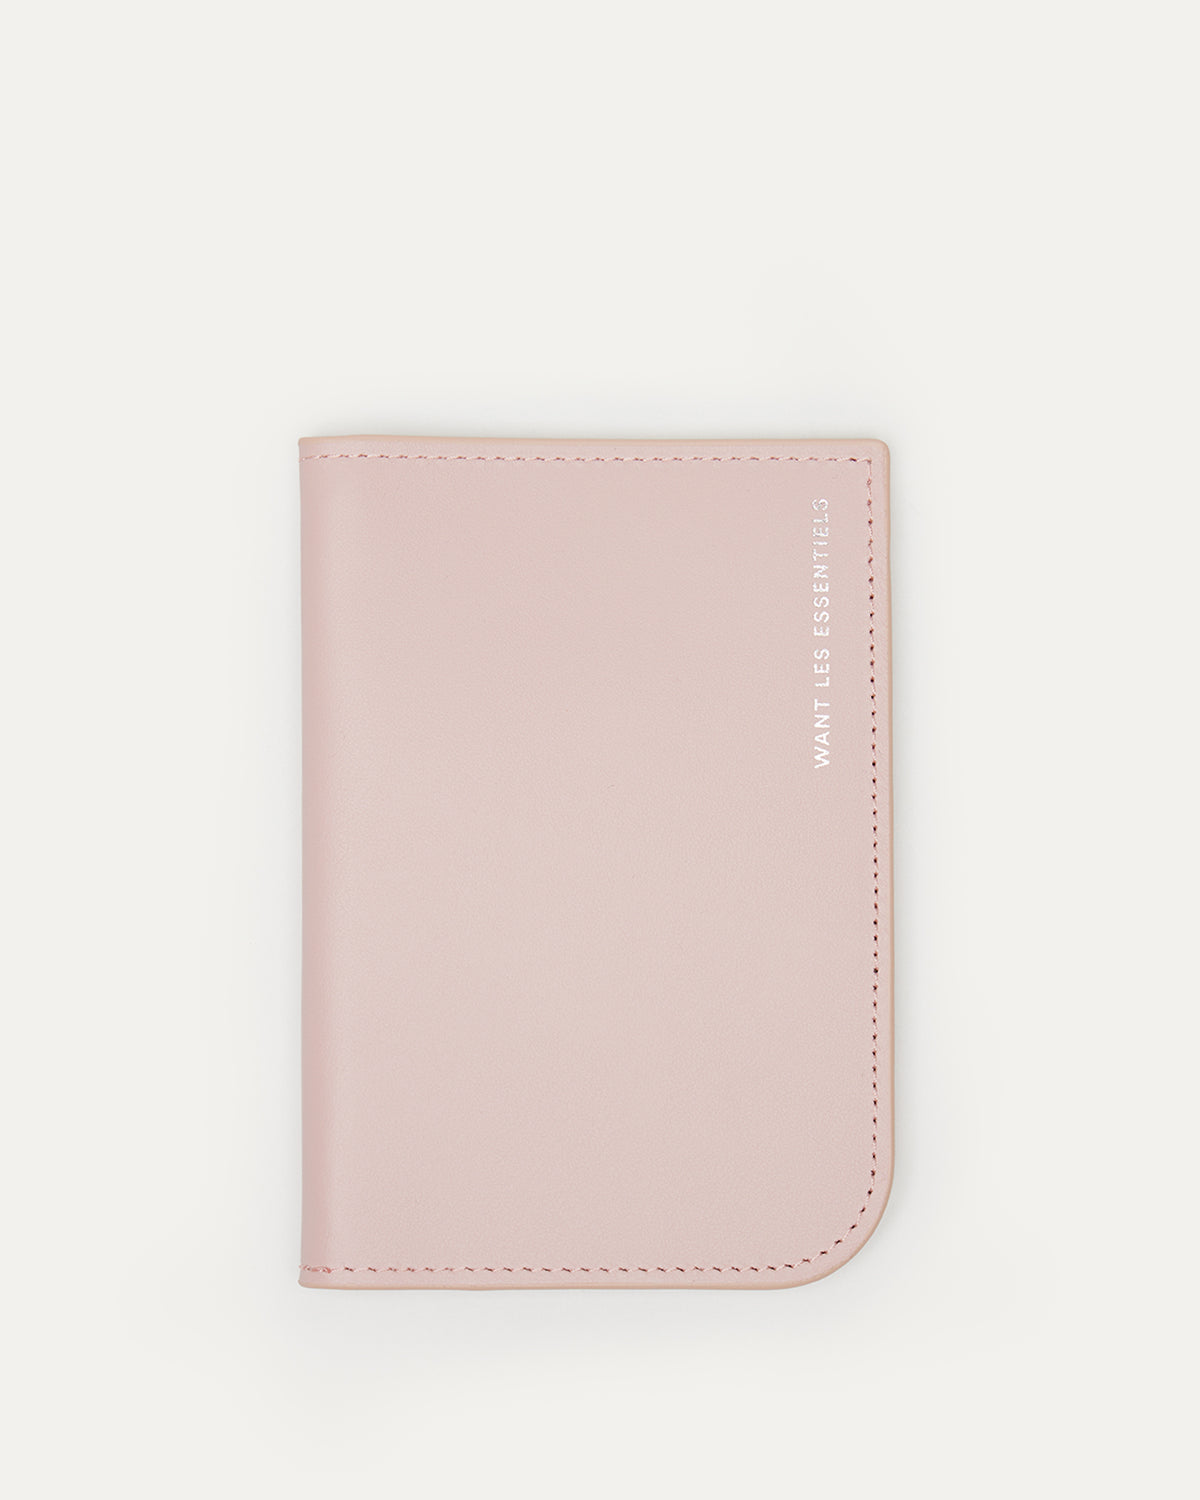 Arch Smooth Leather Passport Cover